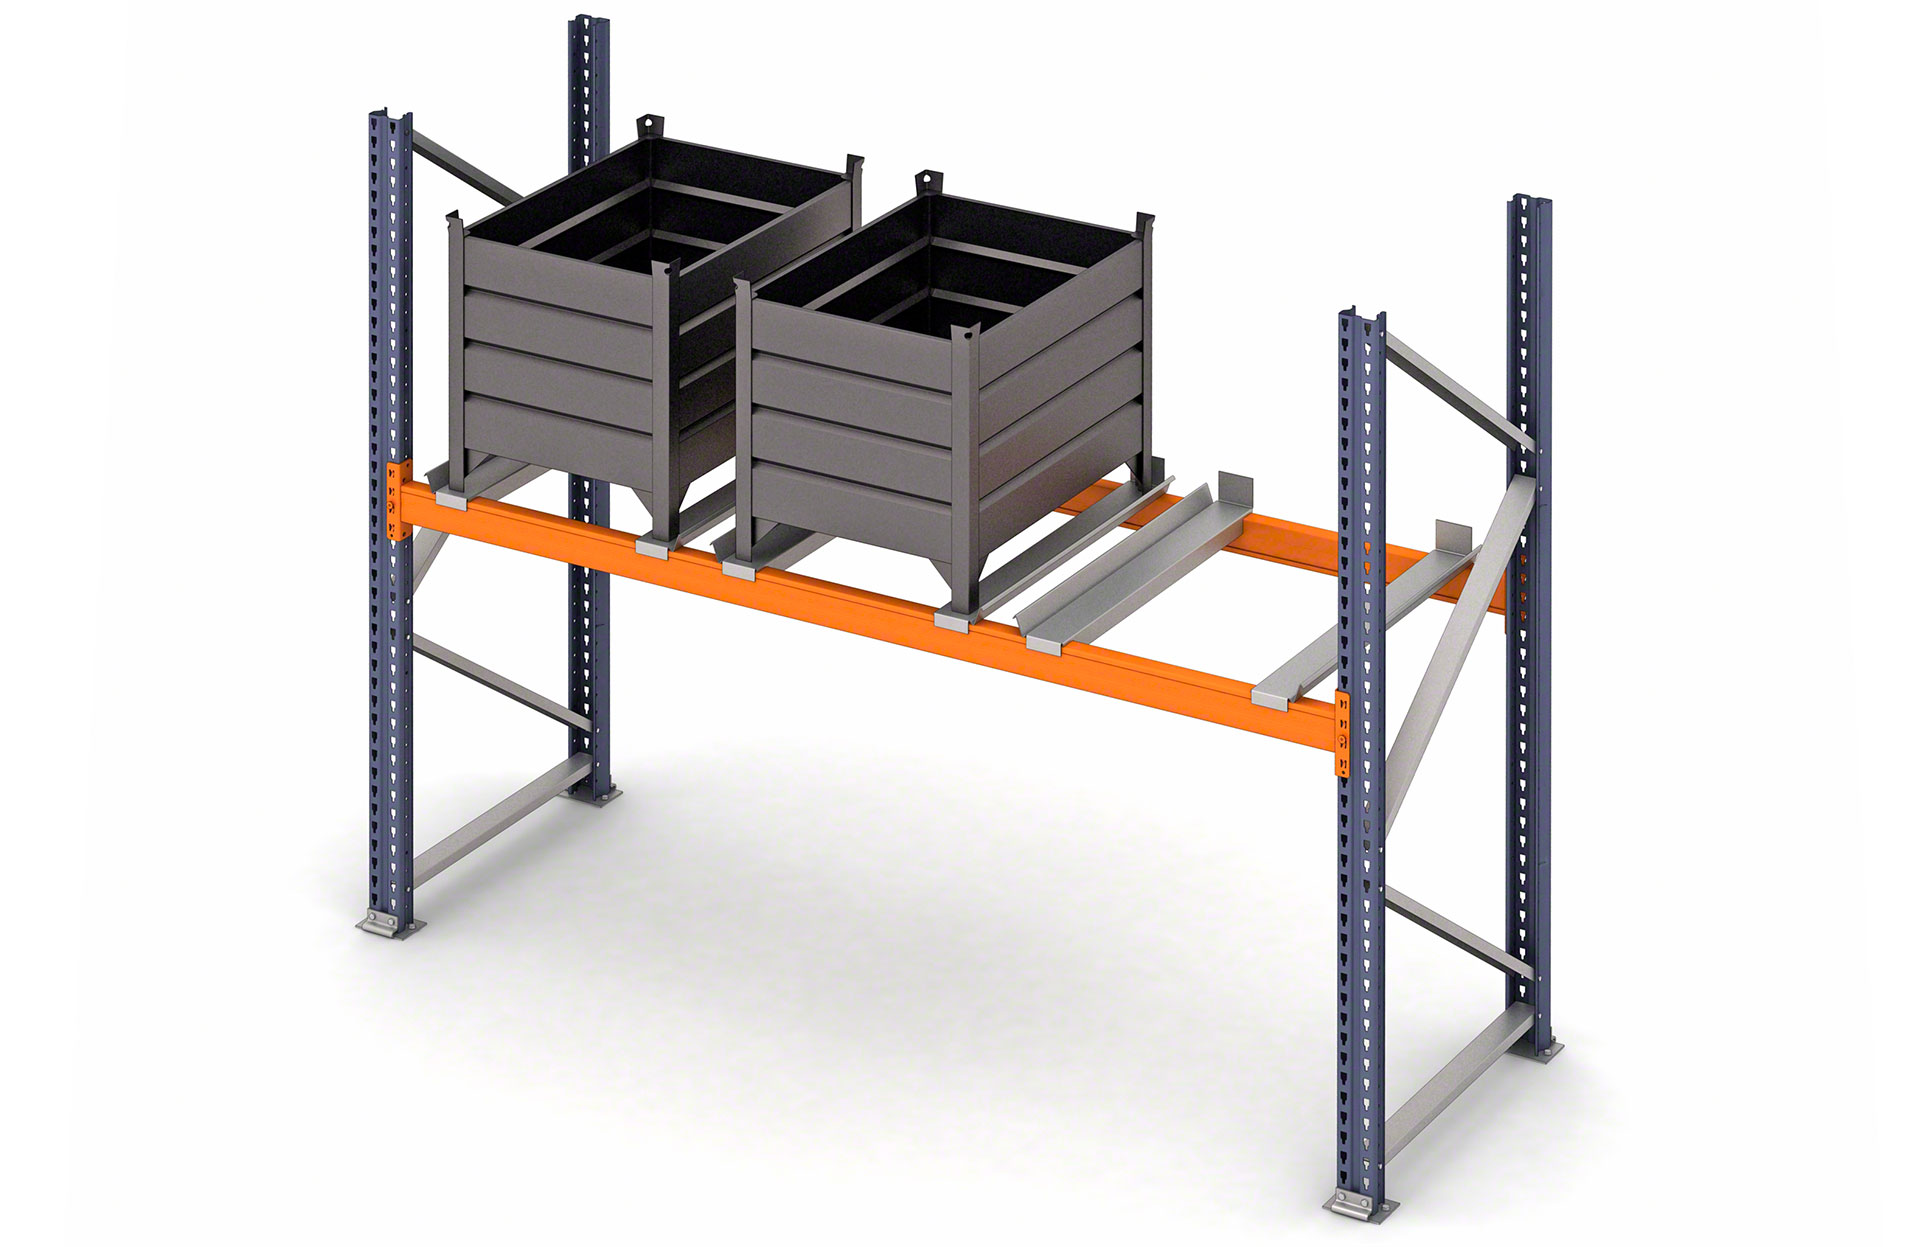 Container support bars on pallet racking